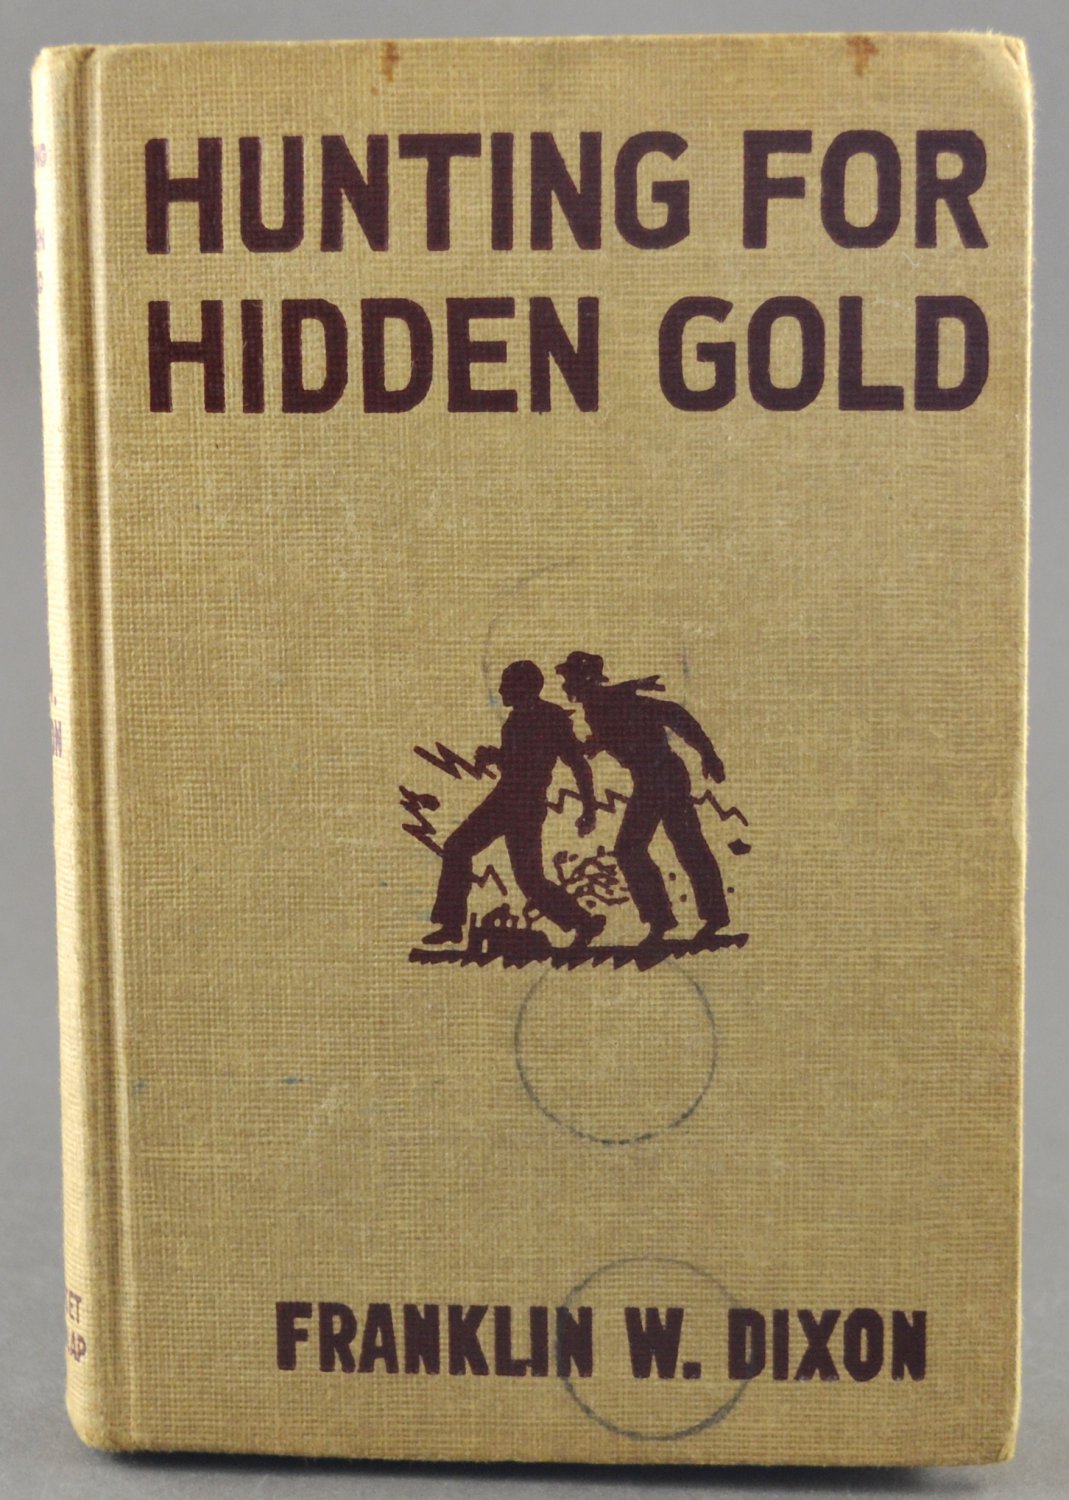 The Hardy Boys Hunting For Hidden Gold by Franklin W. Dixon